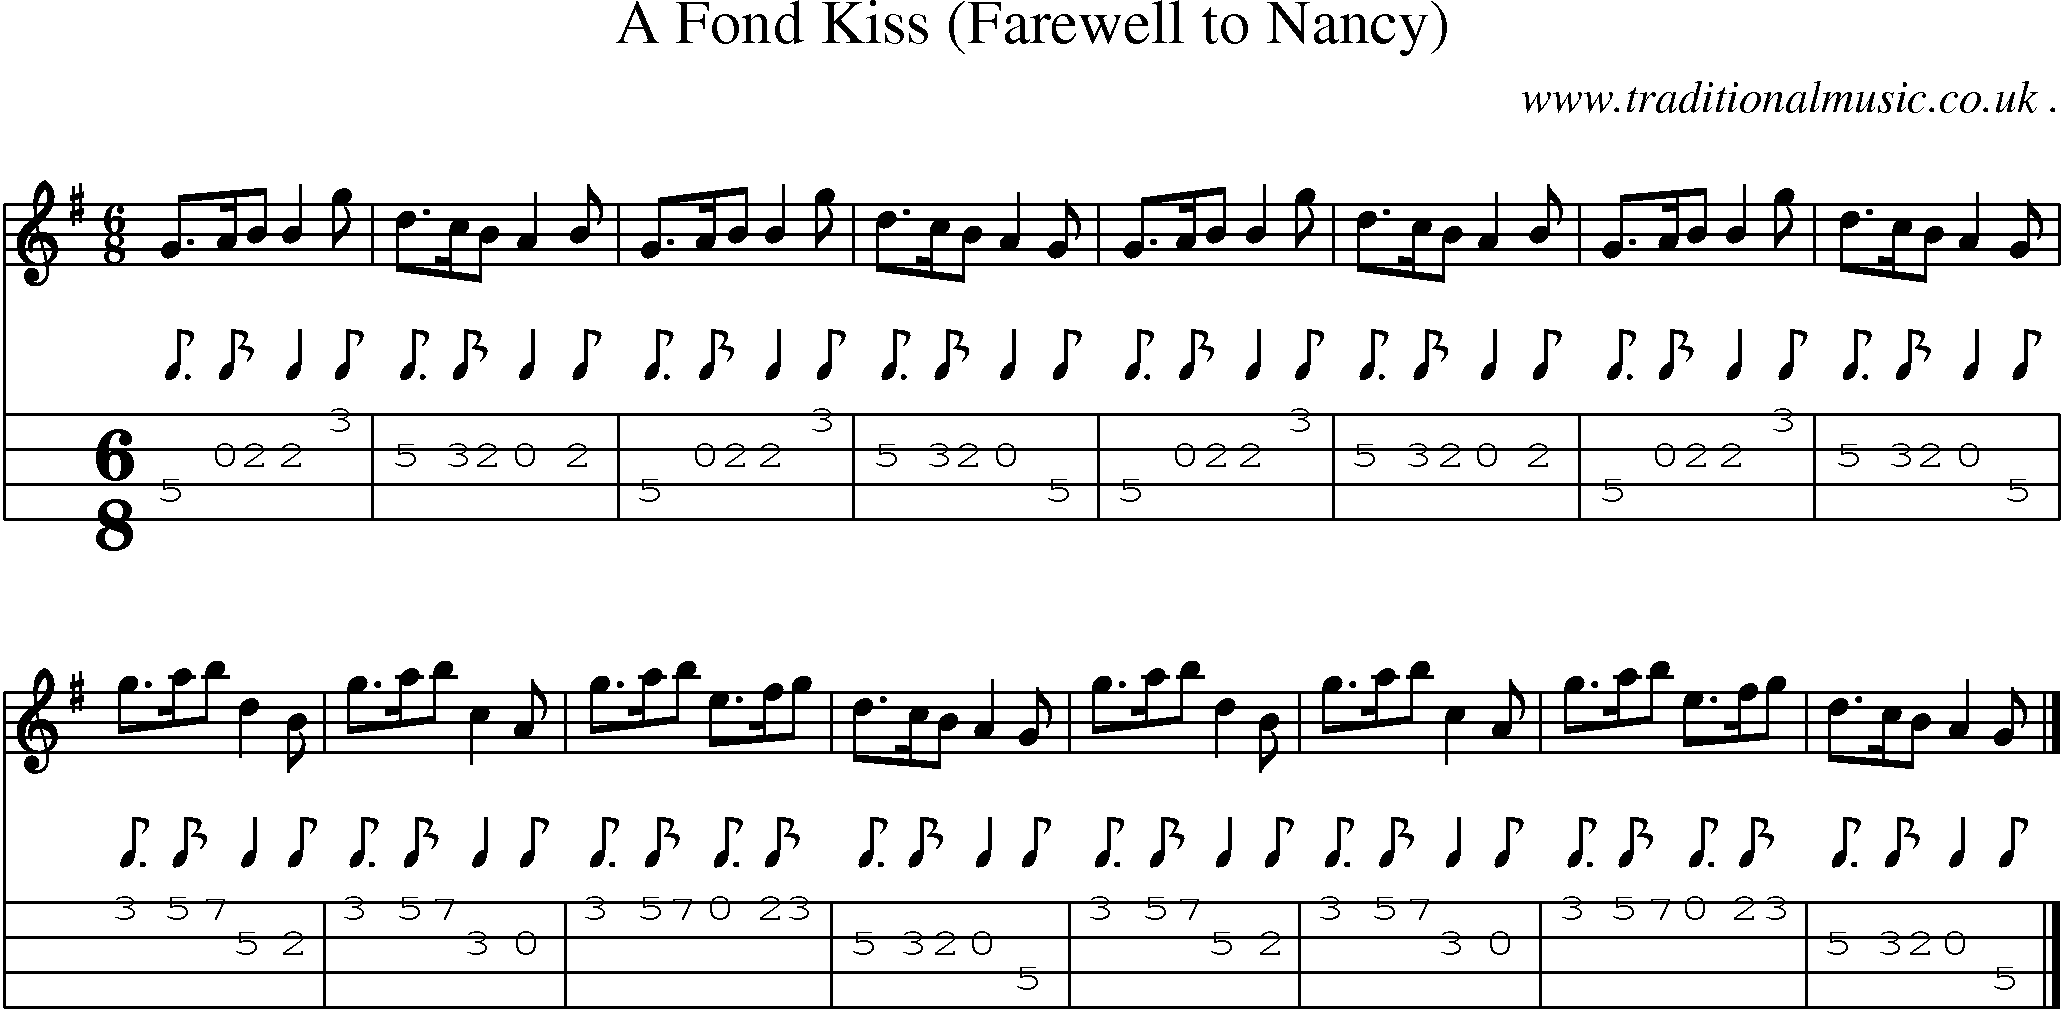 Sheet-music  score, Chords and Mandolin Tabs for A Fond Kiss Farewell To Nancy